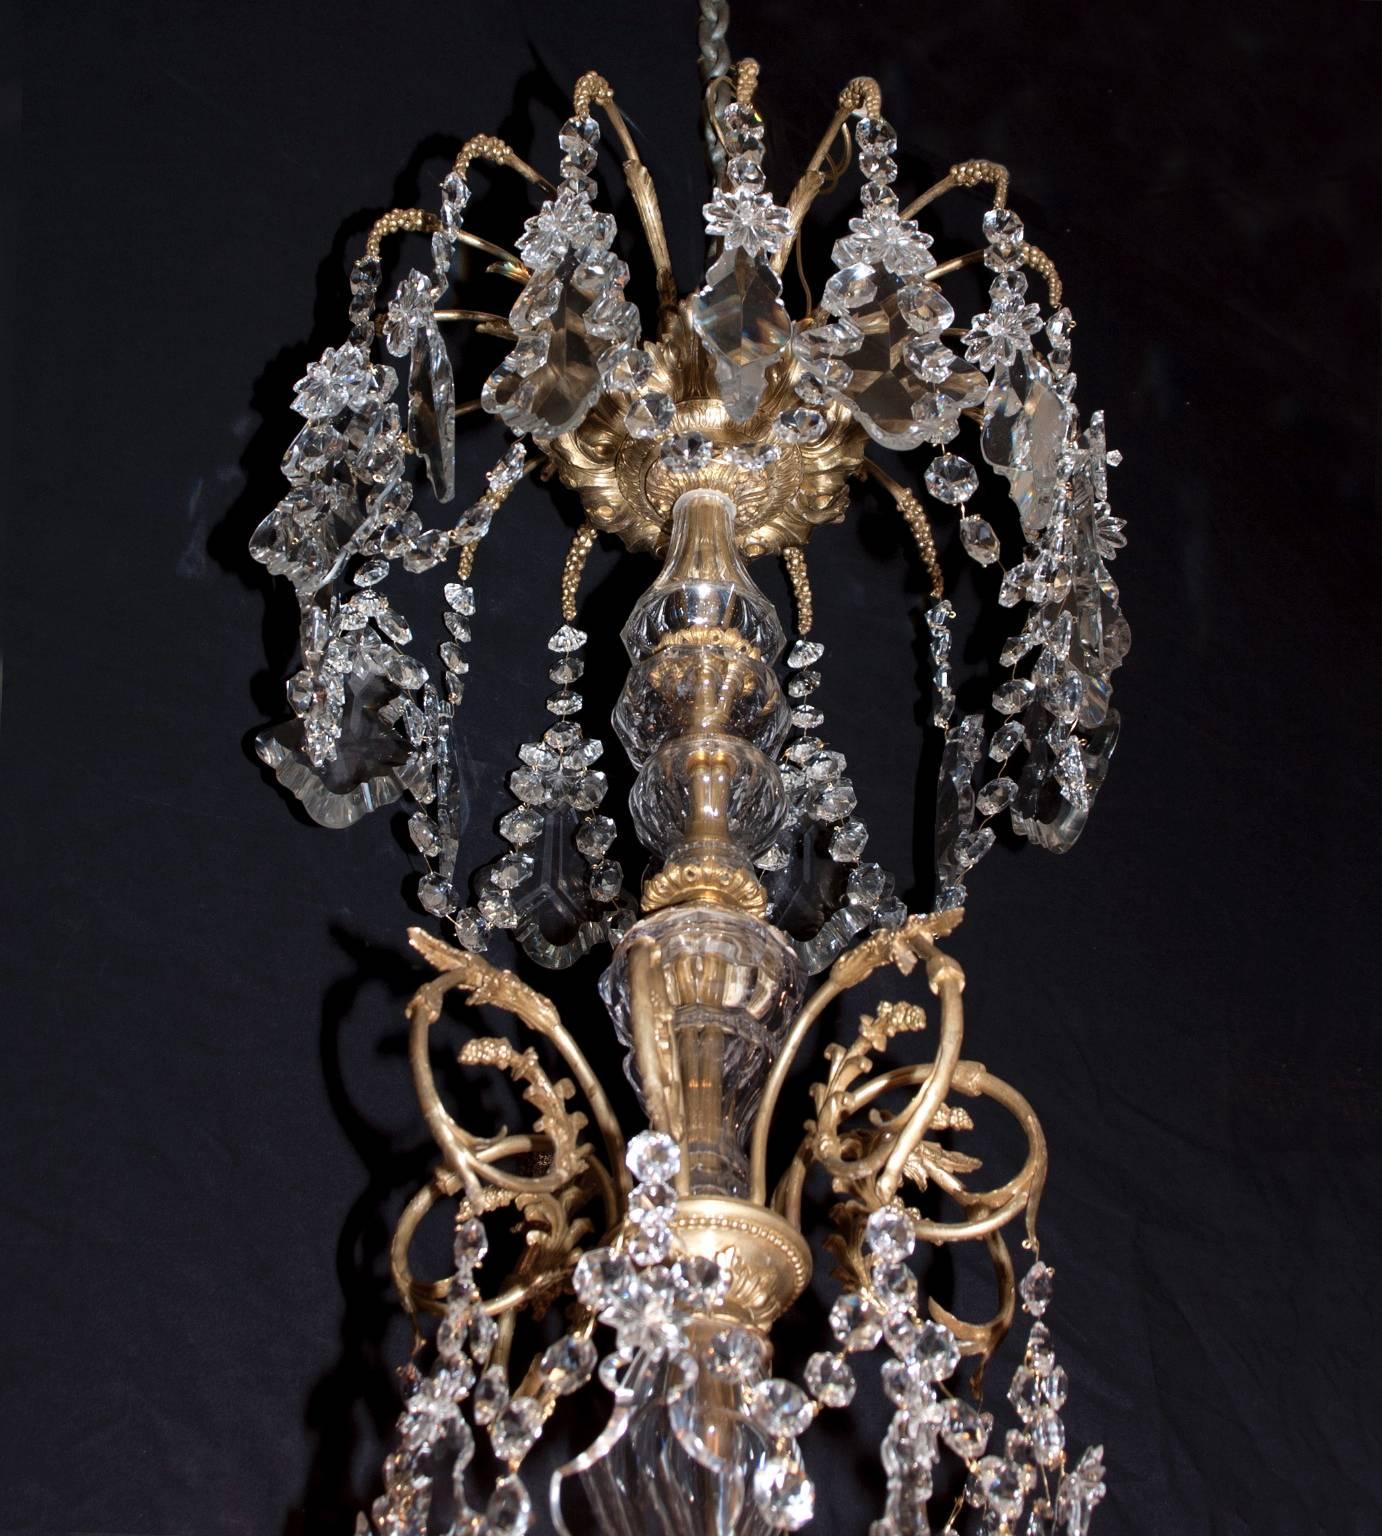 This antique chandelier hangs with quite the royal presence, an elegant figure and all Baccarat crystal. Forty-eight lights are staged in a three tier pattern. An elongated stem stretches upwards from the lighted tiers, ending in an elegant crown